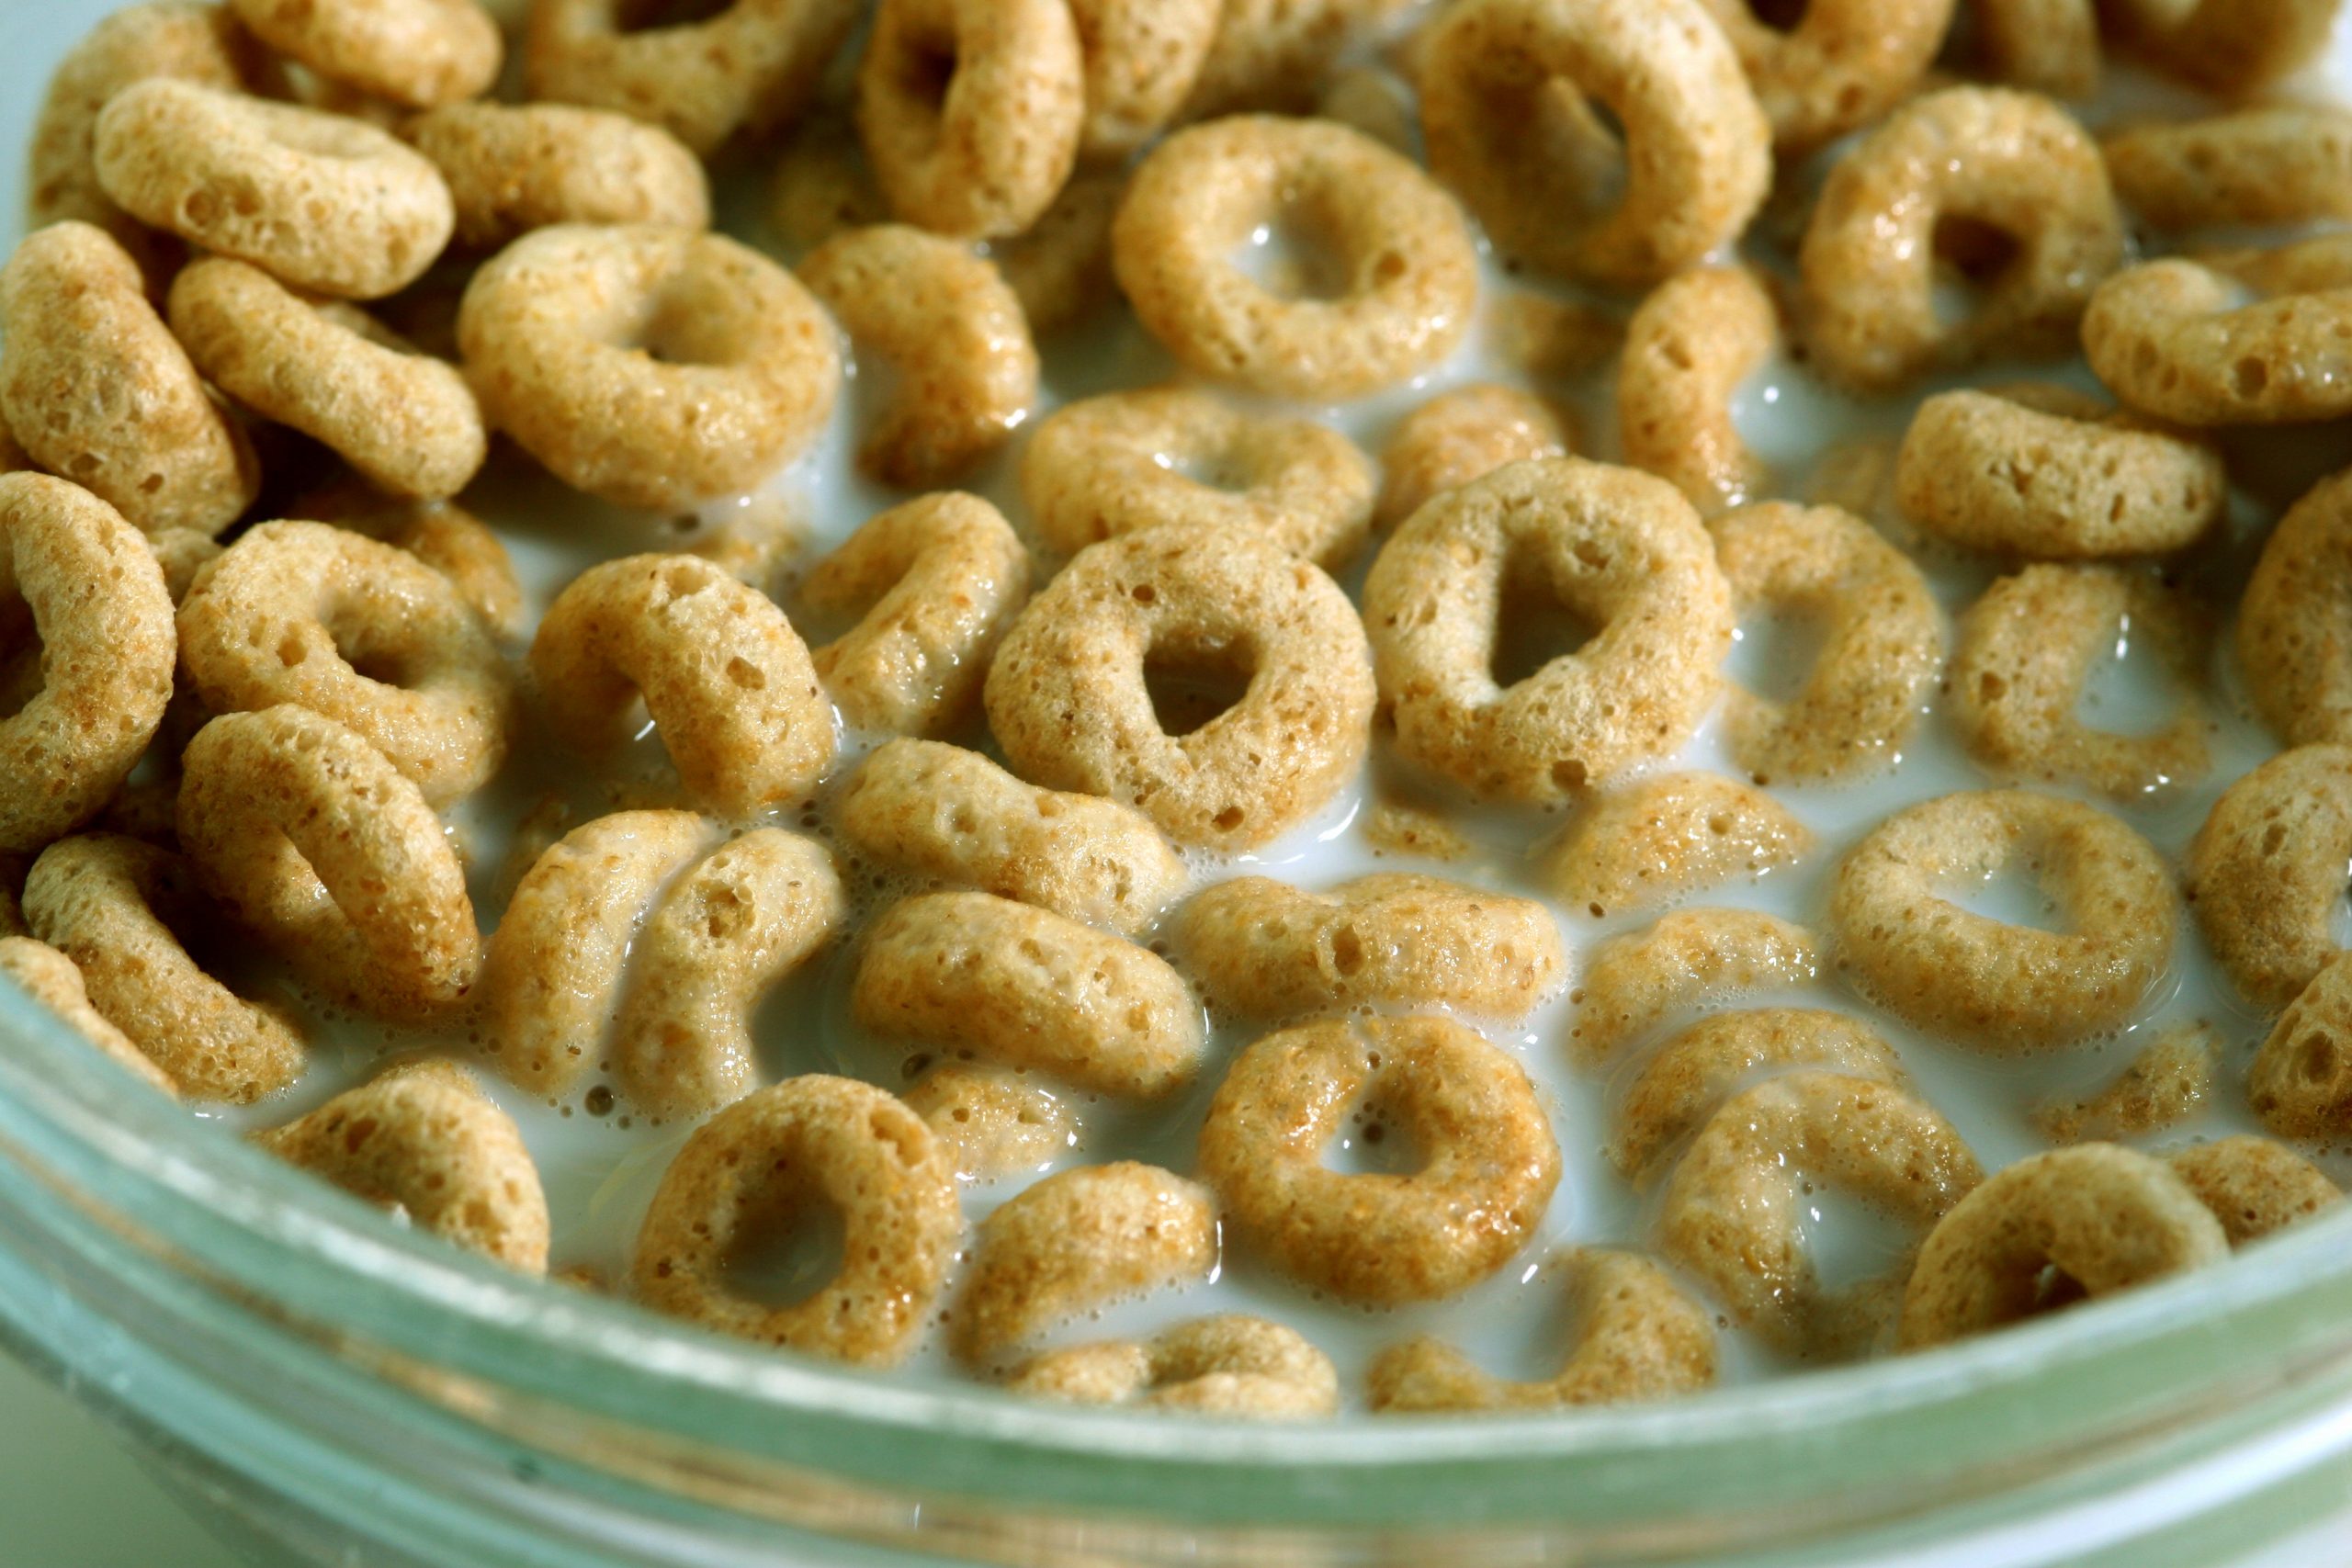 Honey Nut Cheerios Using LIVE Bees in its Sign